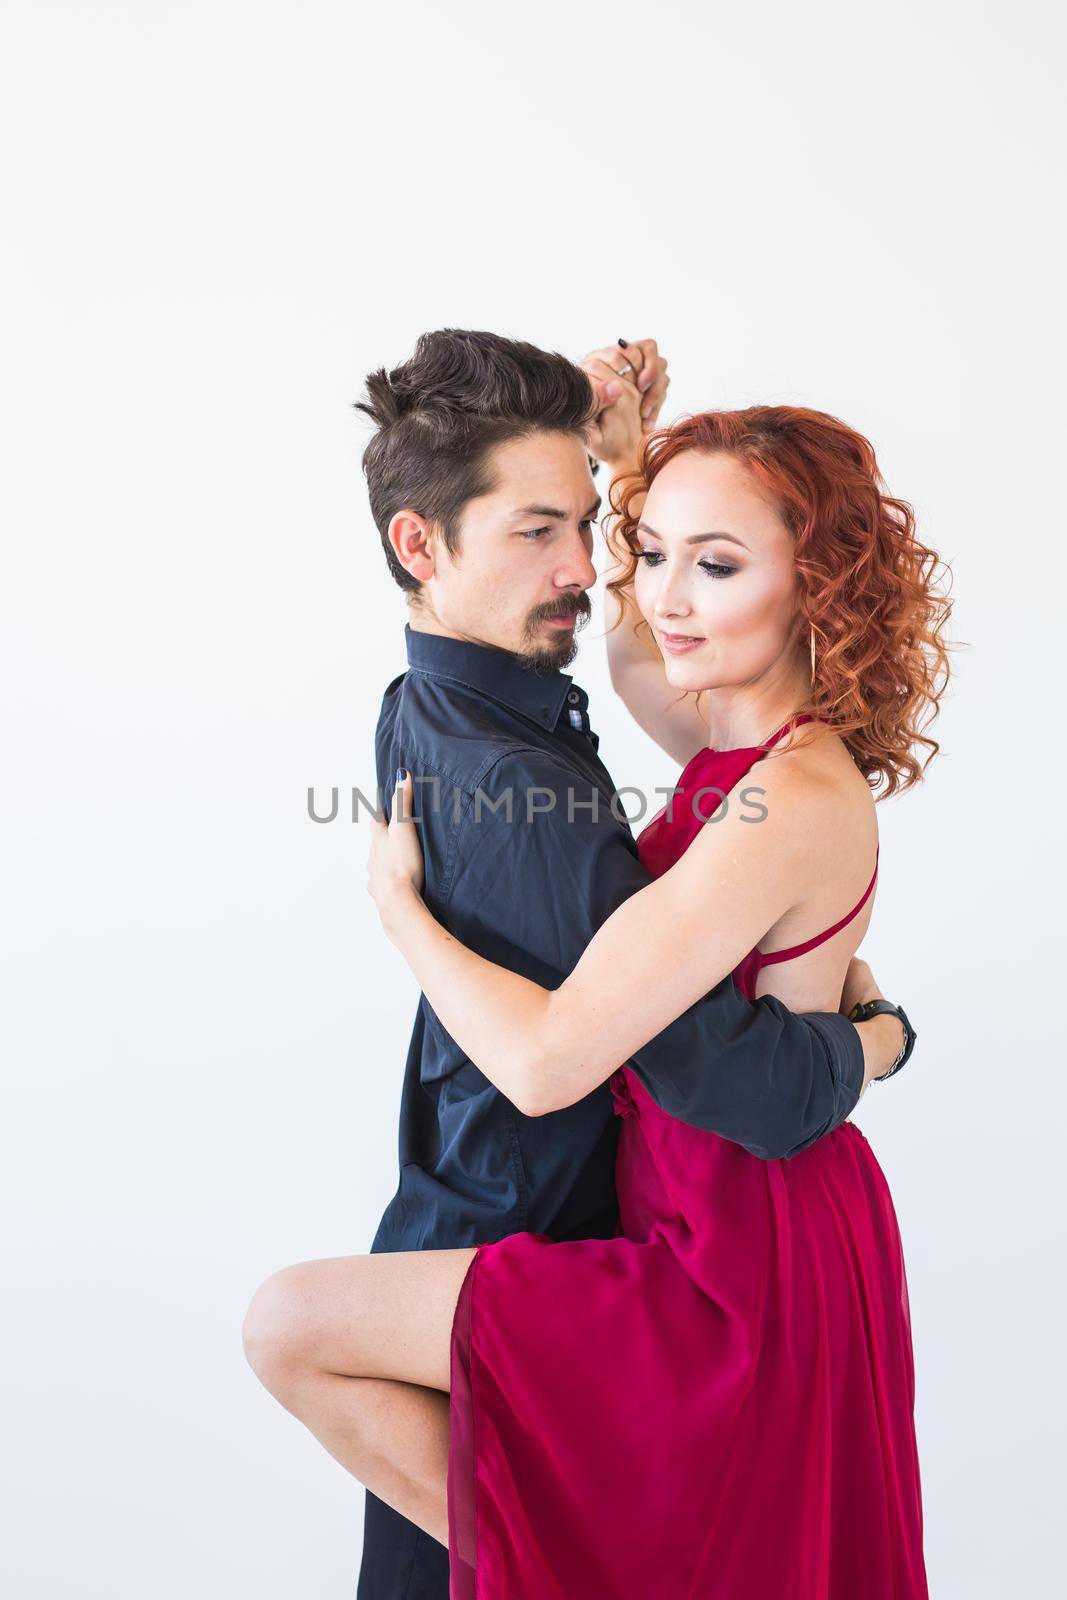 Social dance, bachata, kizomba, salsa, tango concept - Woman dressed in red dress and man in a black costume over white background by Satura86